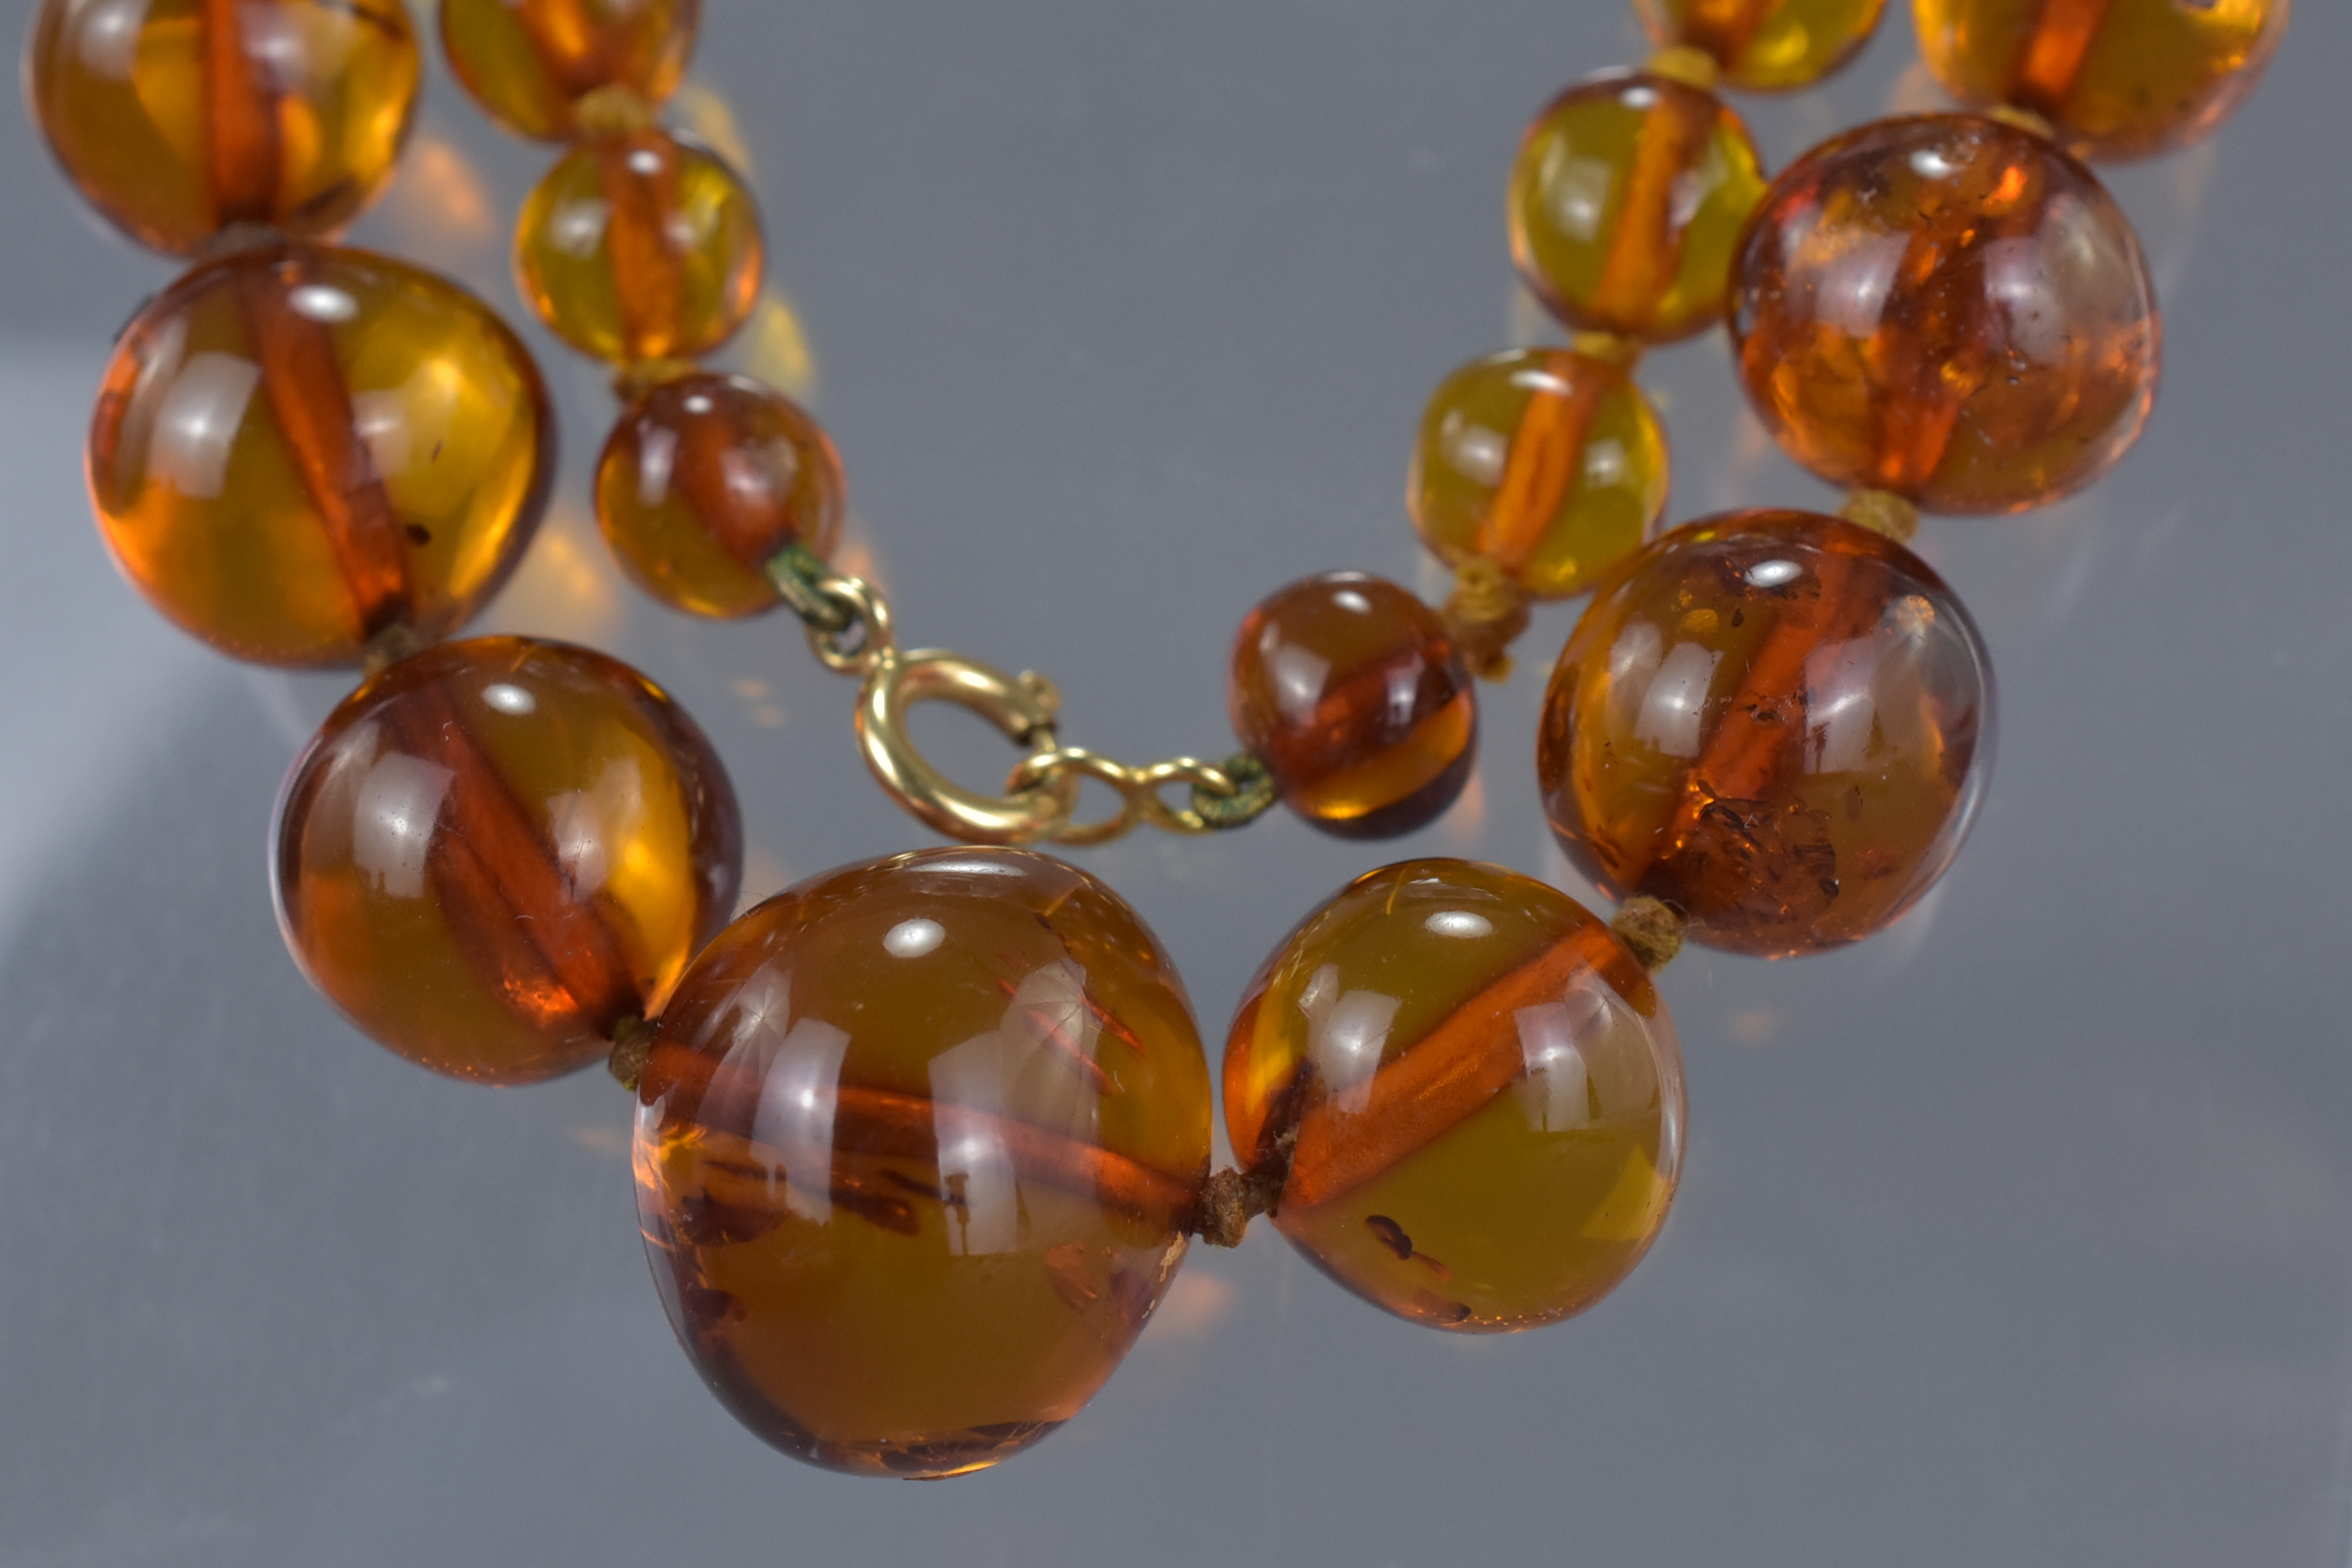 Baltic Clear Amber Bead Necklace containing 63 Graduating Beads, approx. 50 grams - Image 3 of 3